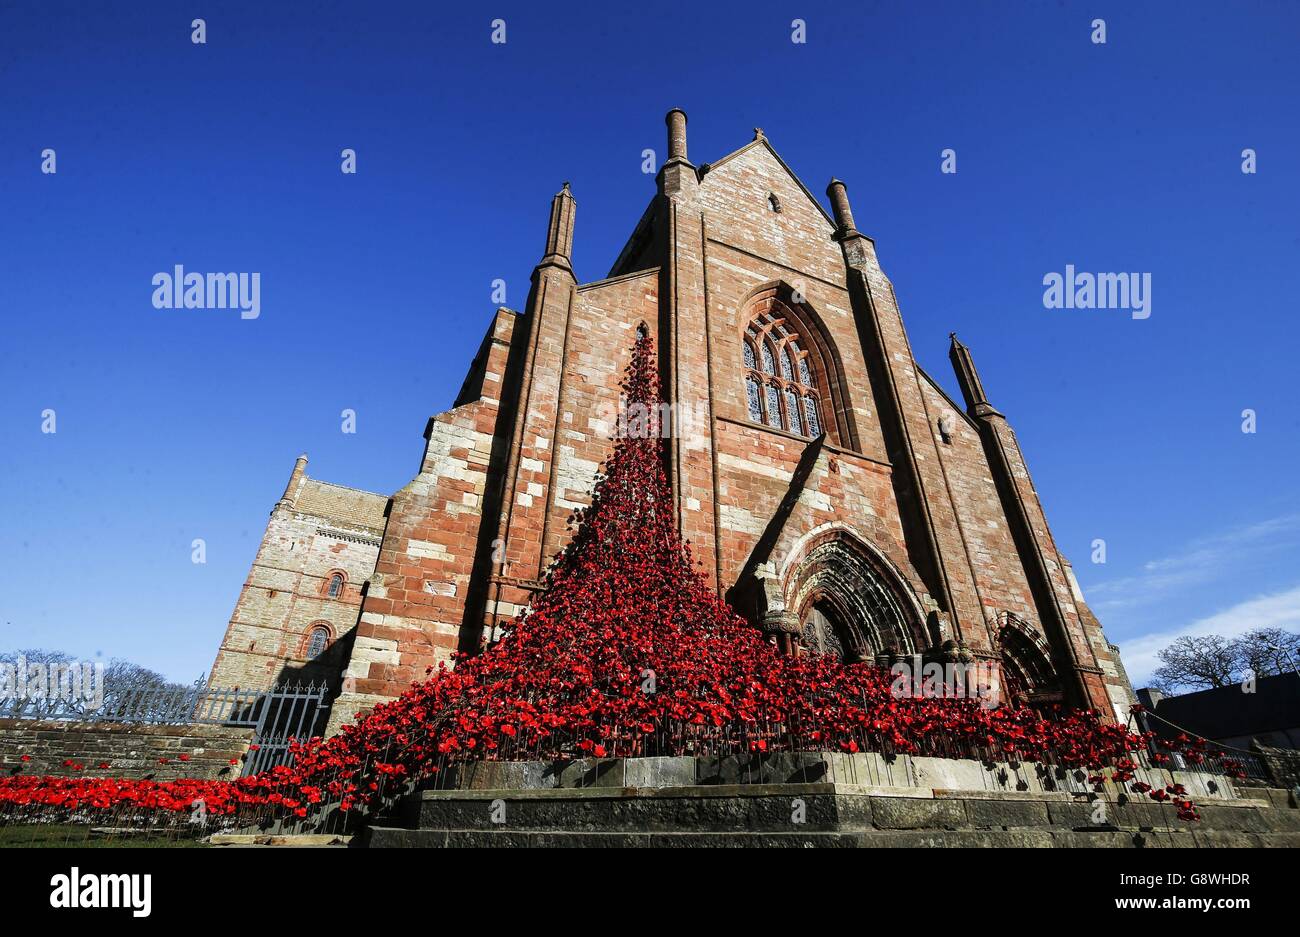 The Weeping Window sculpture made of ceramic poppies at St Magnus Cathedral in Orkney, Scotland. Stock Photo